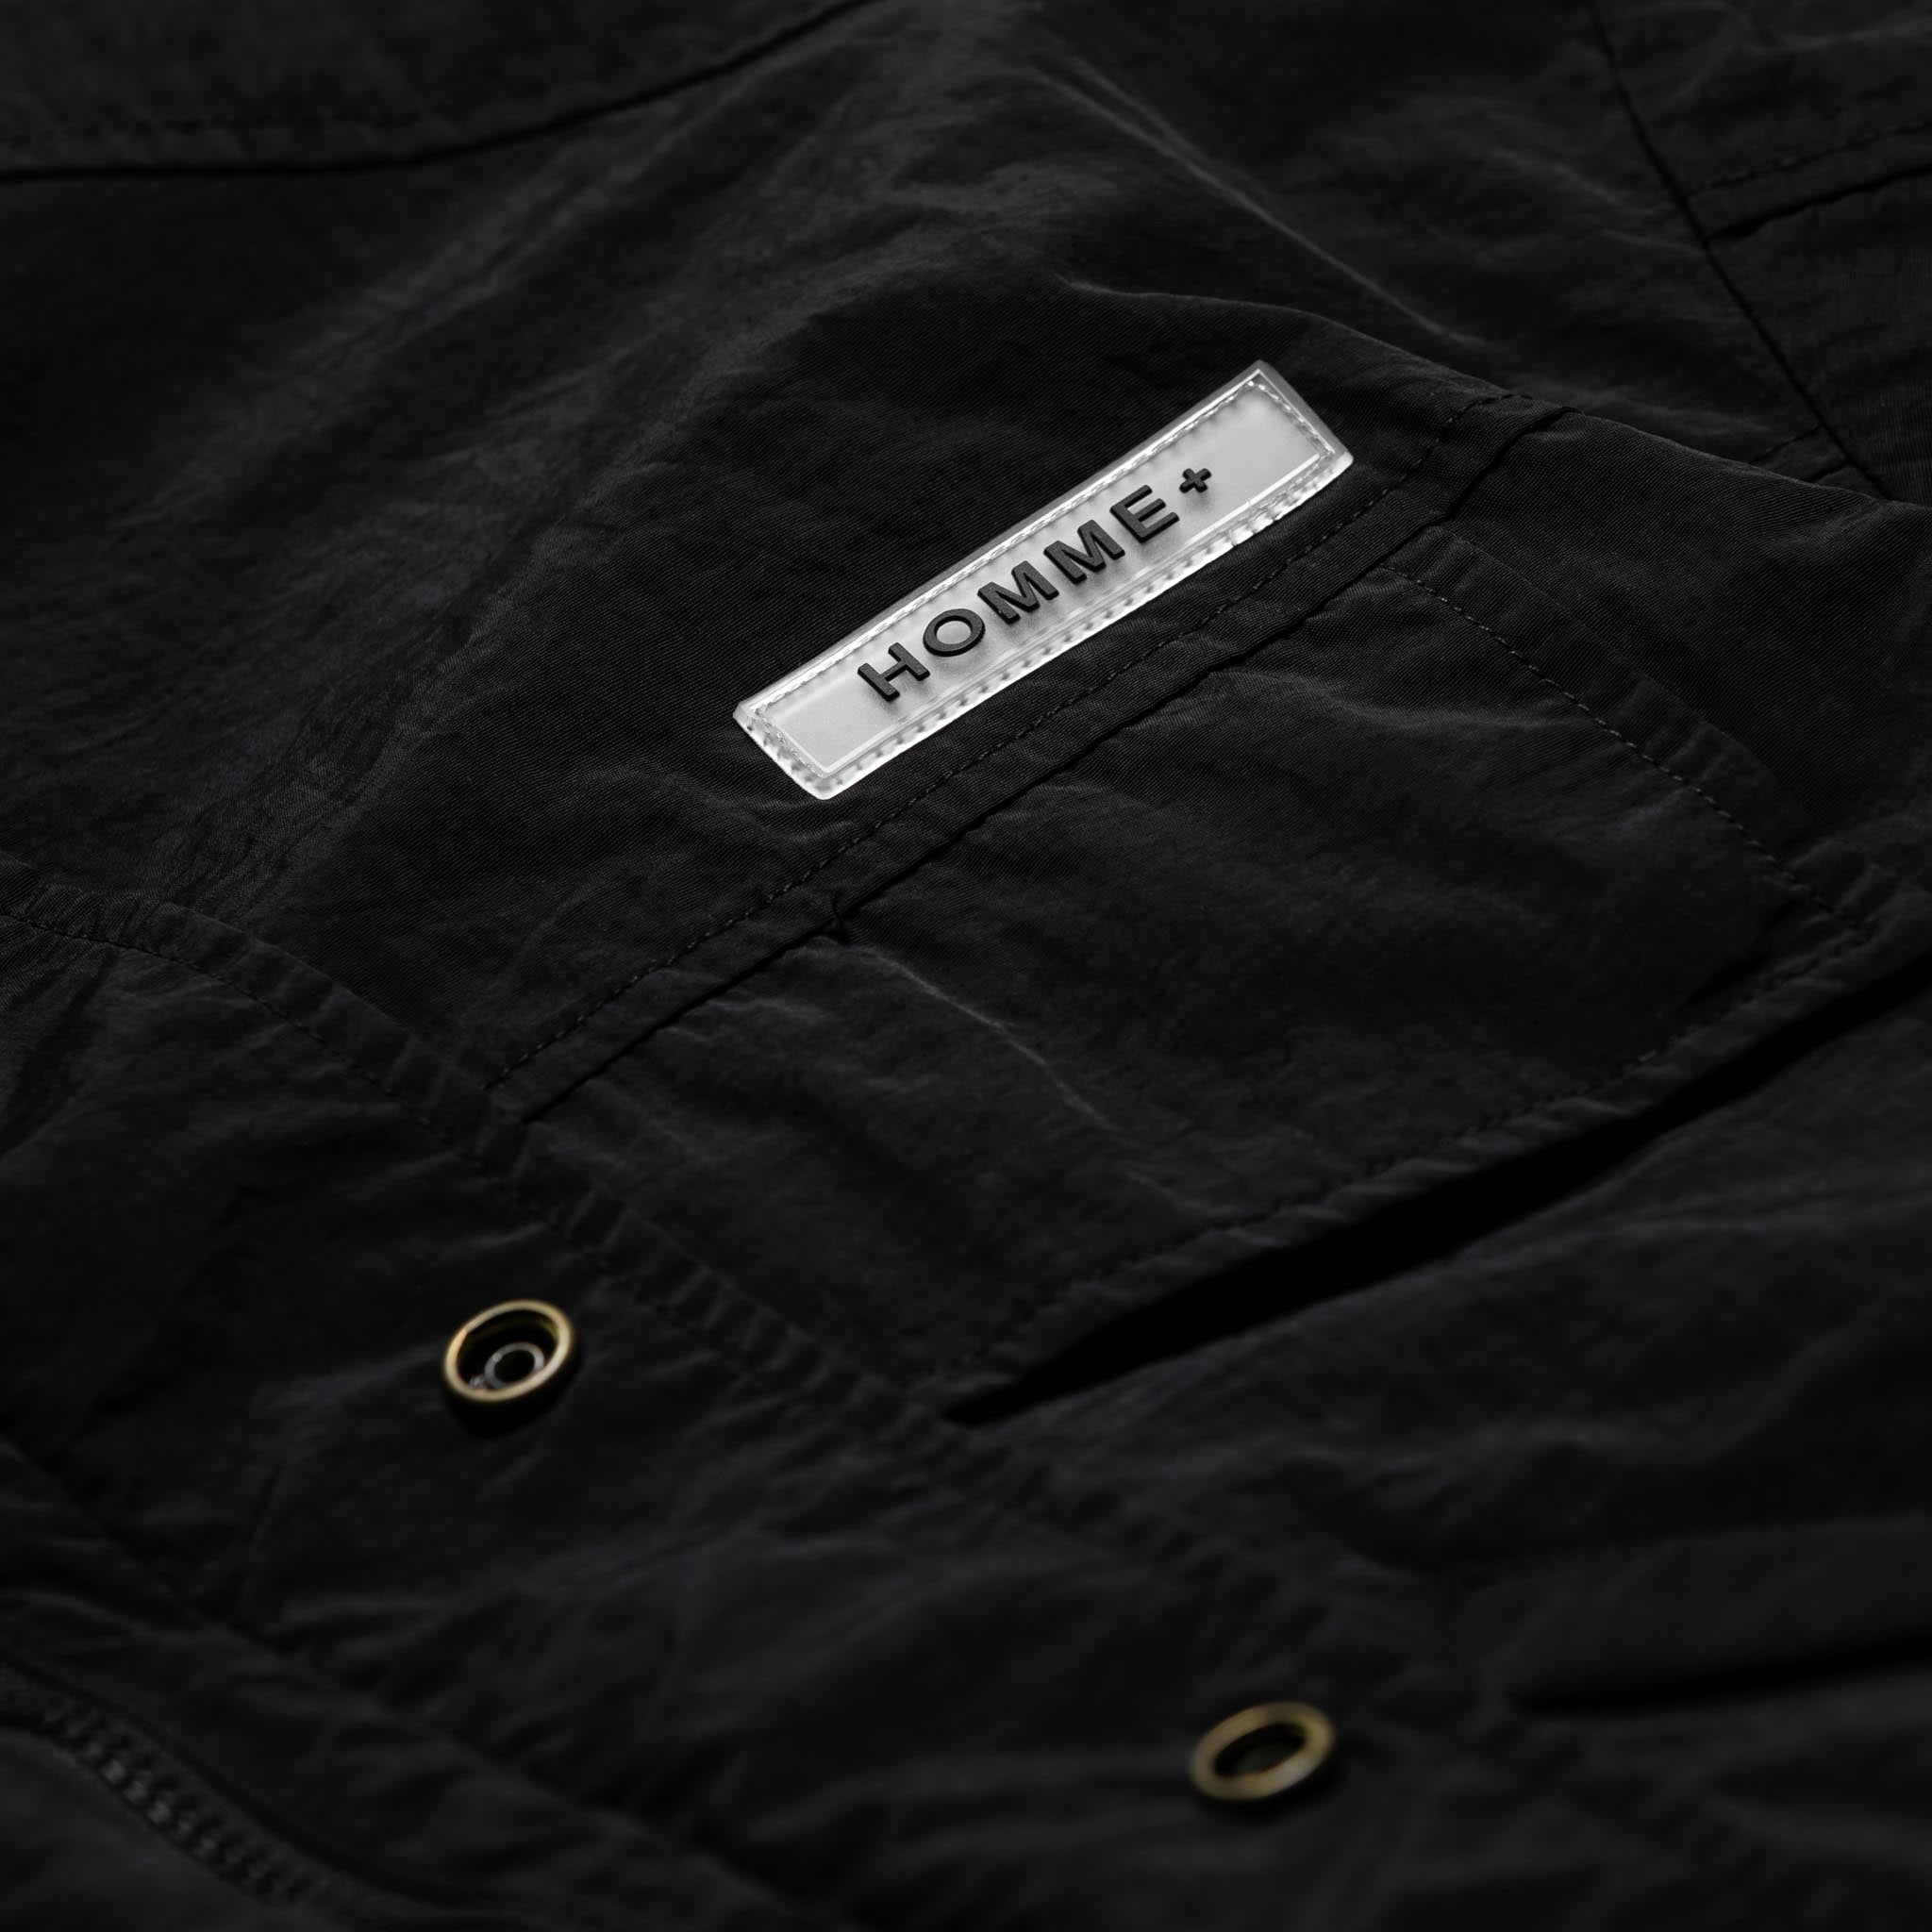 HOMME+ Quilted Bomber Black